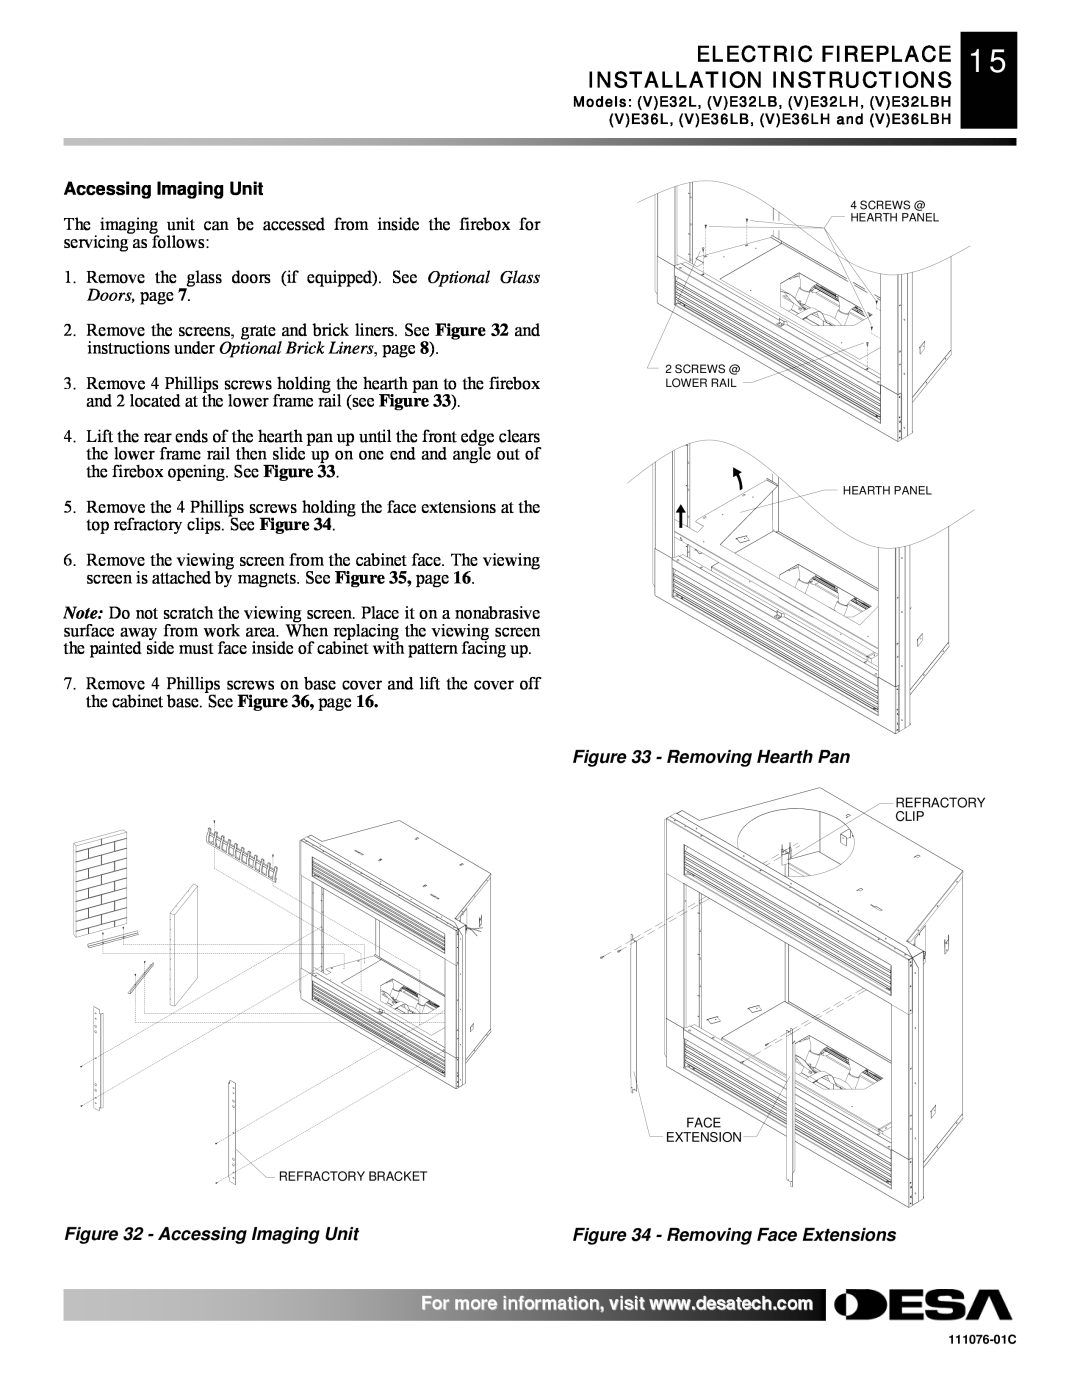 Desa E36(L)(B)(H) ELECTRIC FIREPLACE 15 INSTALLATION INSTRUCTIONS, Accessing Imaging Unit, Removing Hearth Pan 